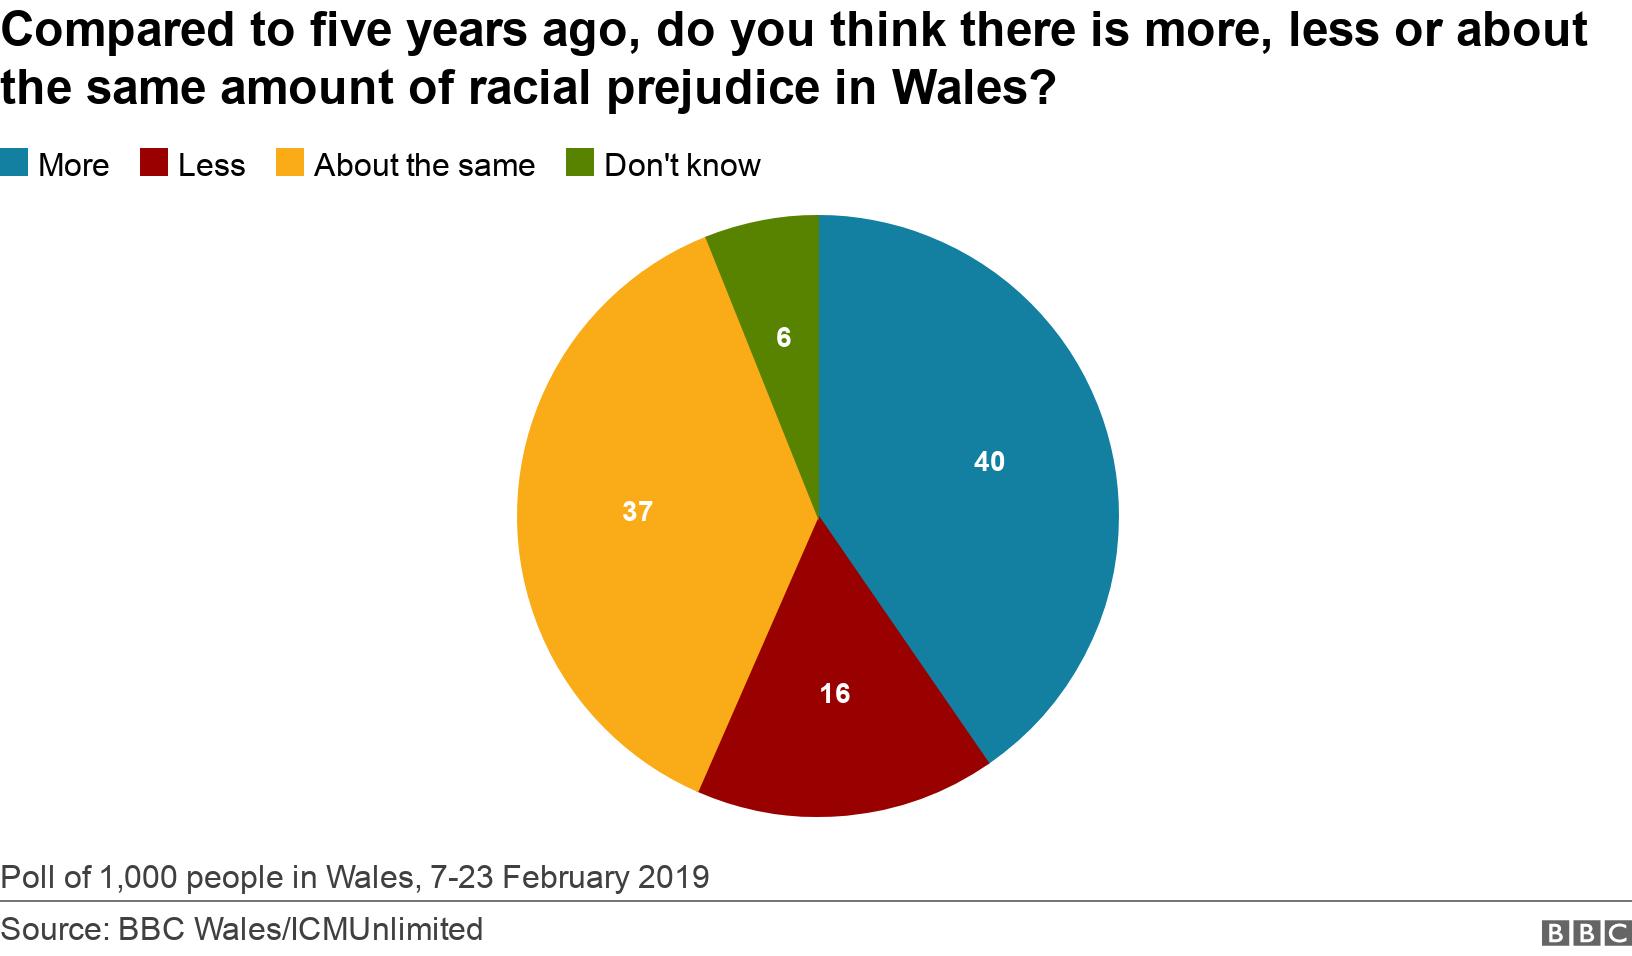 Compared to five years ago, do you think there is more, less or about the same amount of racial prejudice in Wales?. . Data shows poll responses on views on racial prejudice amount in Wales compared to five years ago Poll of 1,000 people in Wales, 7-23 February 2019.